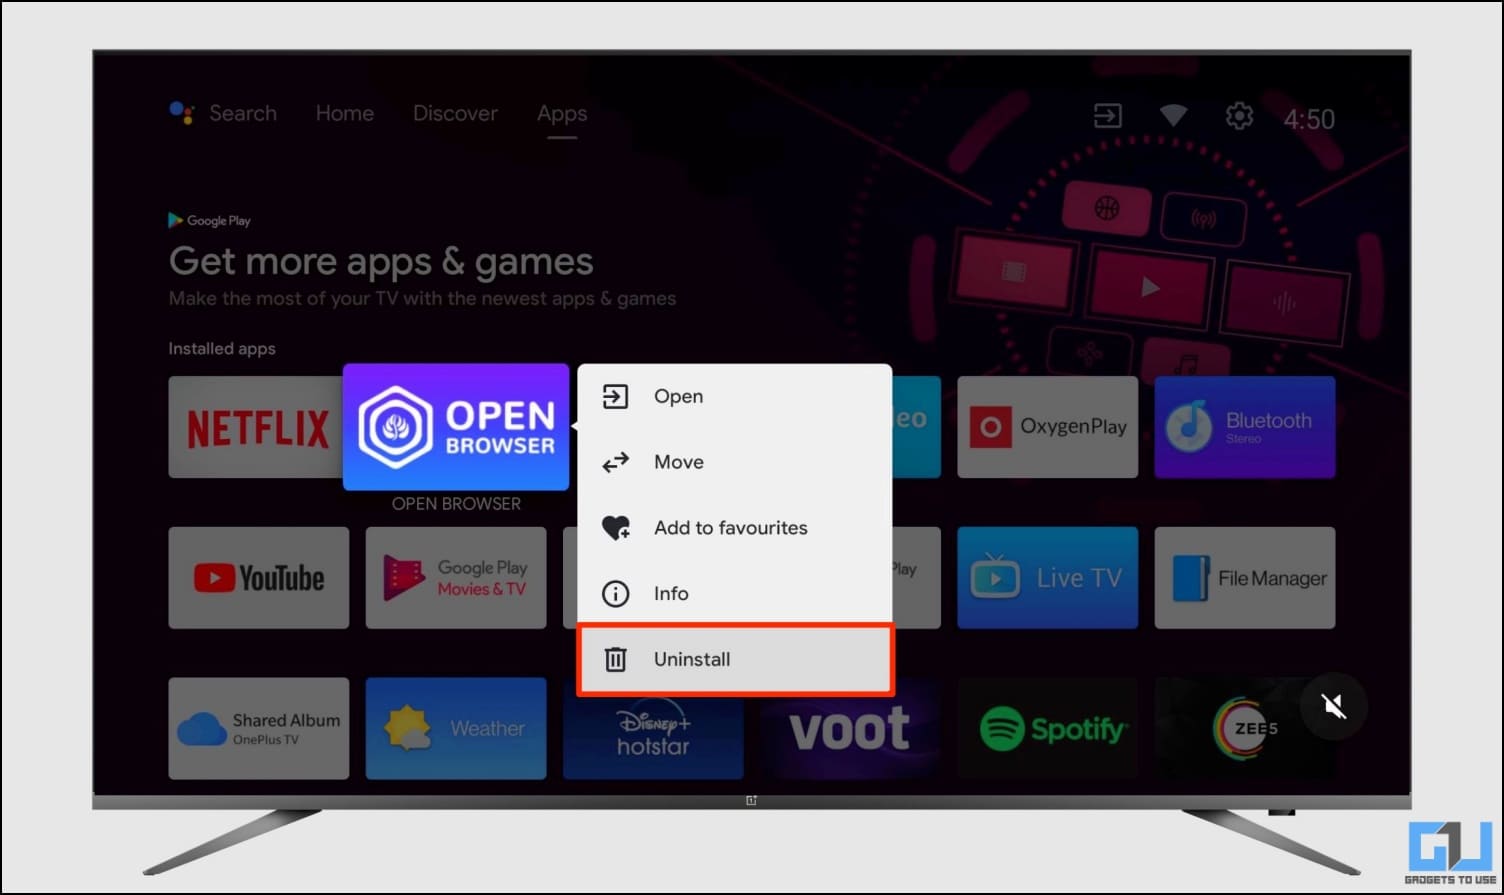 Remove Apps to Make Android TV Faster